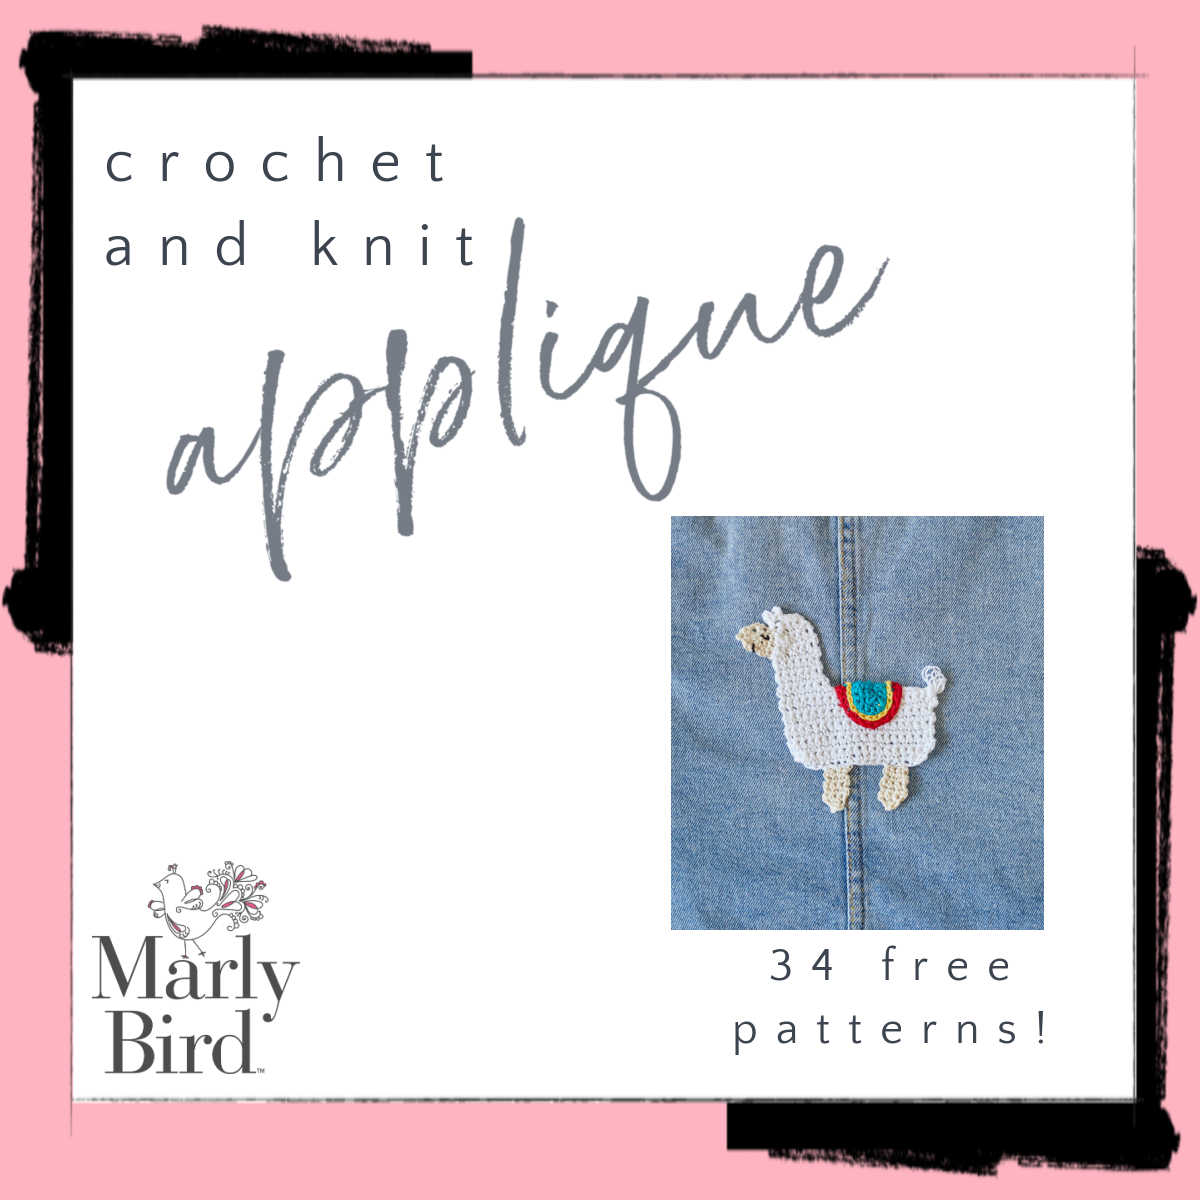 Free Applique Patterns to Crochet and Knit - Marly Bird